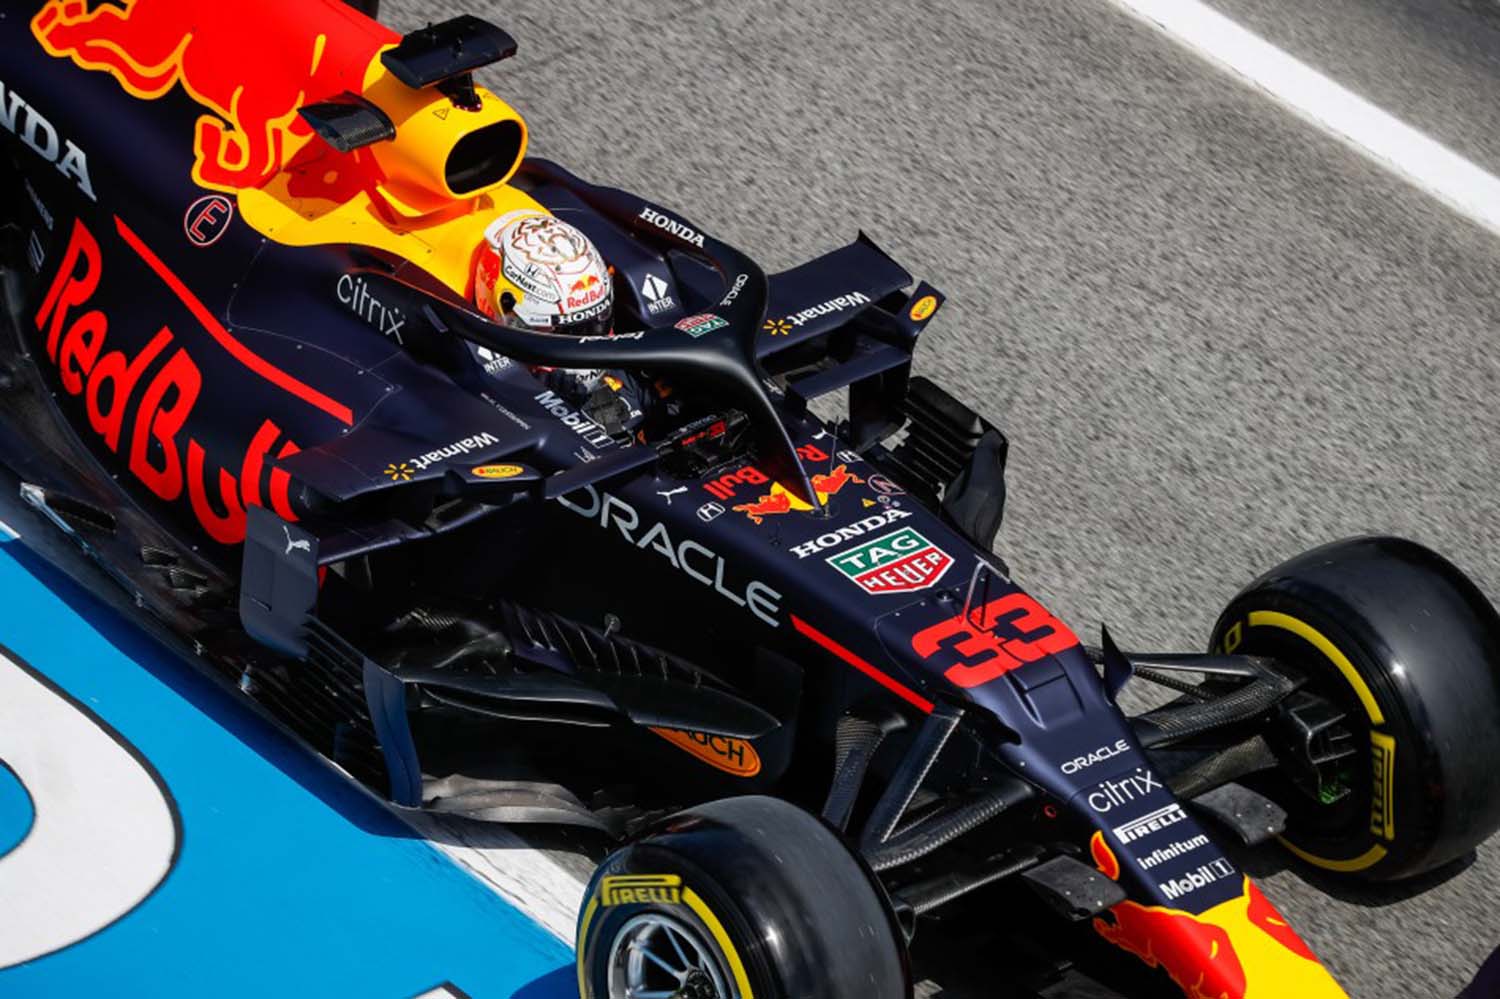 F1 – Verstappen Sets The Pace In Final Practice For Spanish Grand Prix